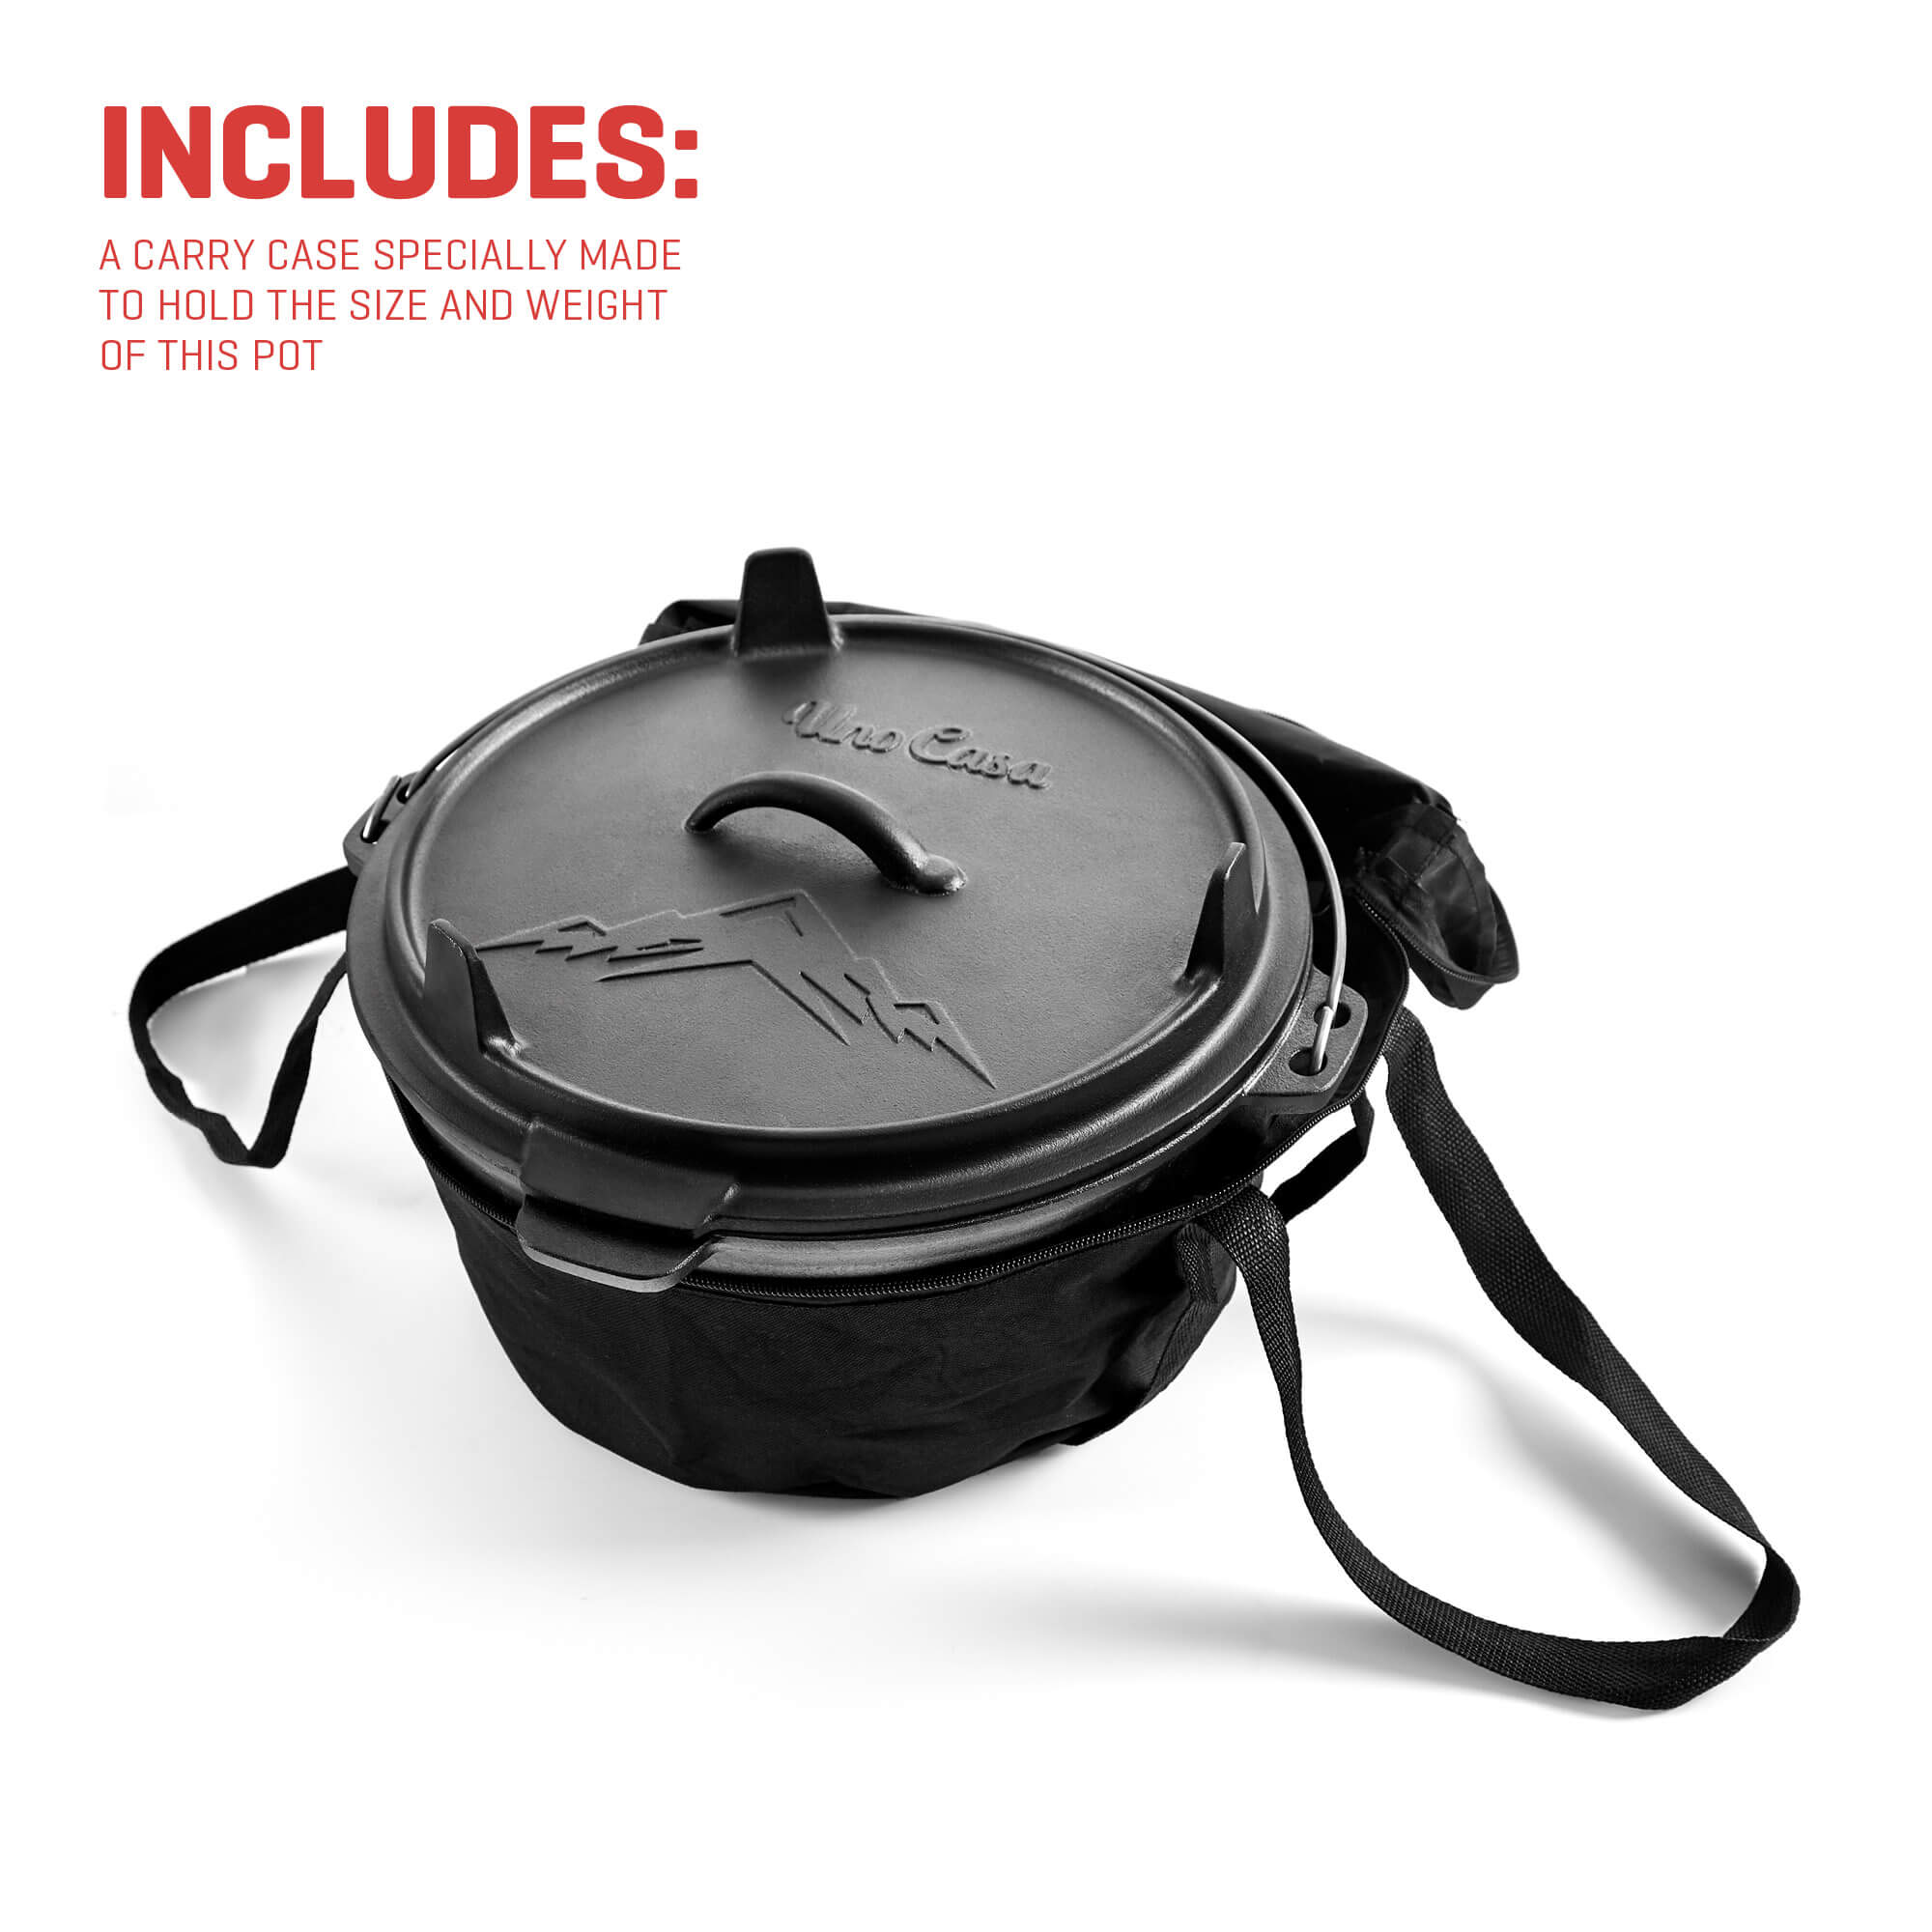 Dutch Oven Sizes - Made In